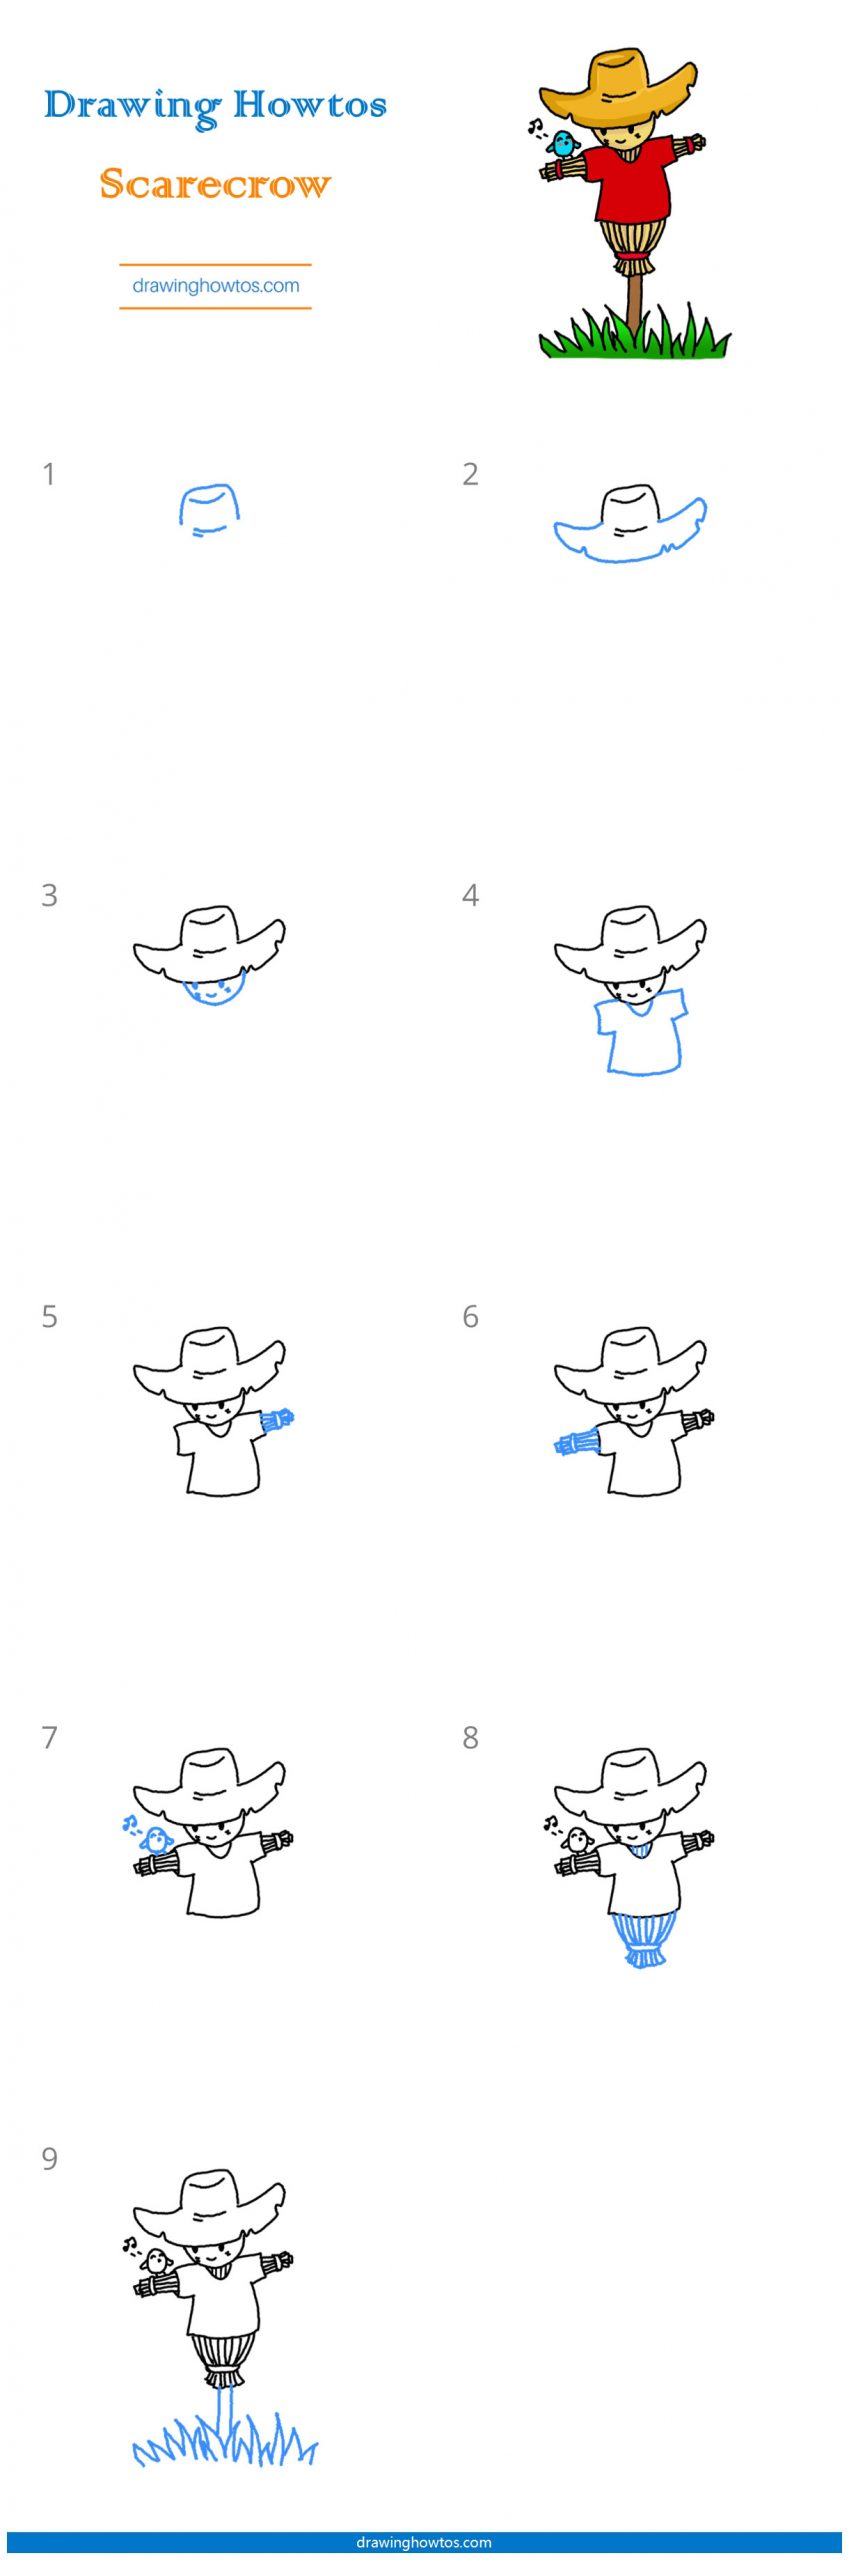 How to Draw a Scarecrow Step by Step